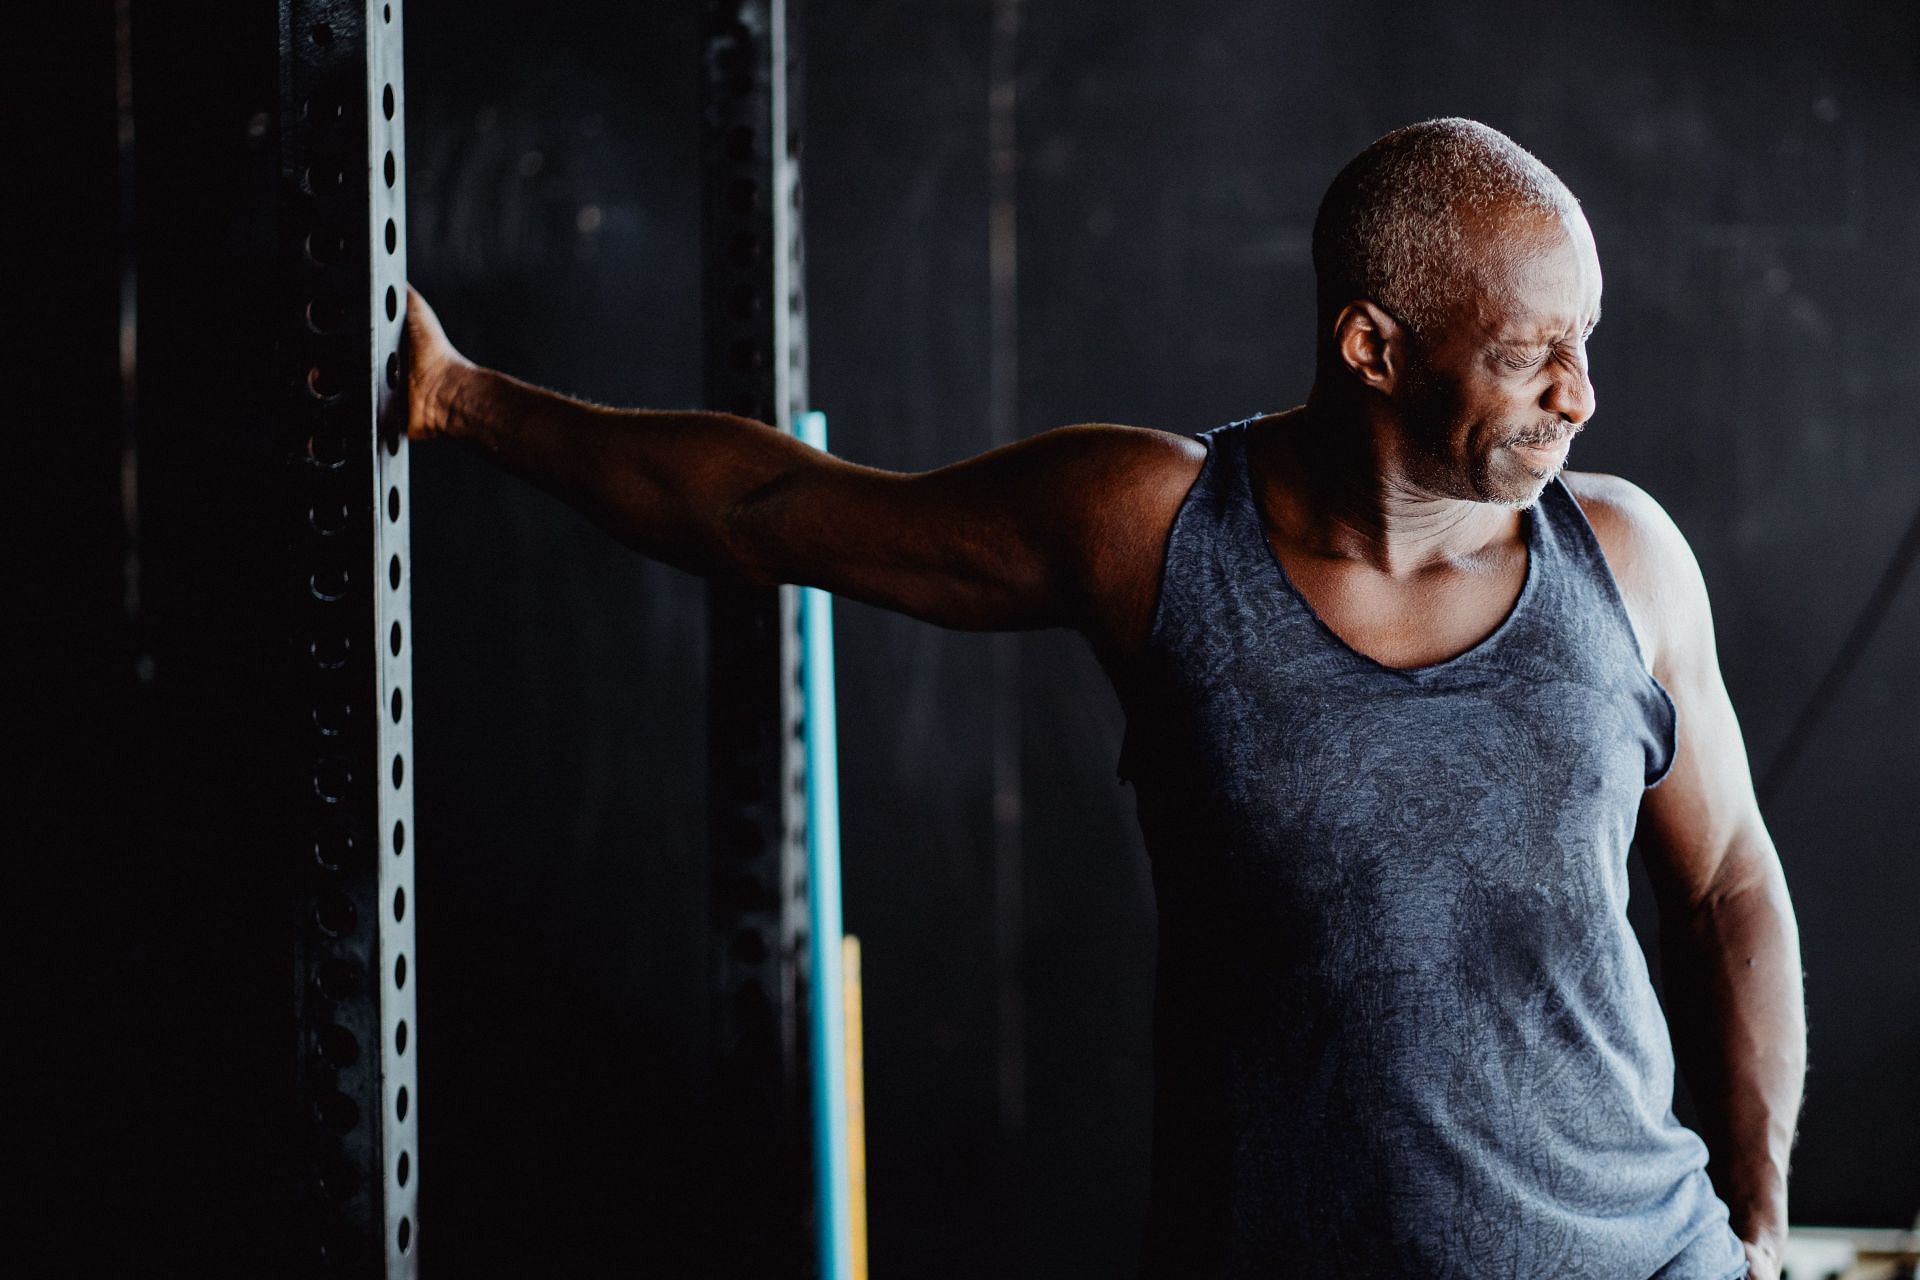 Exercises for shoulder impingement help in getting relief from the pain. (Image via Pexels/ Ketut Subiyanto)